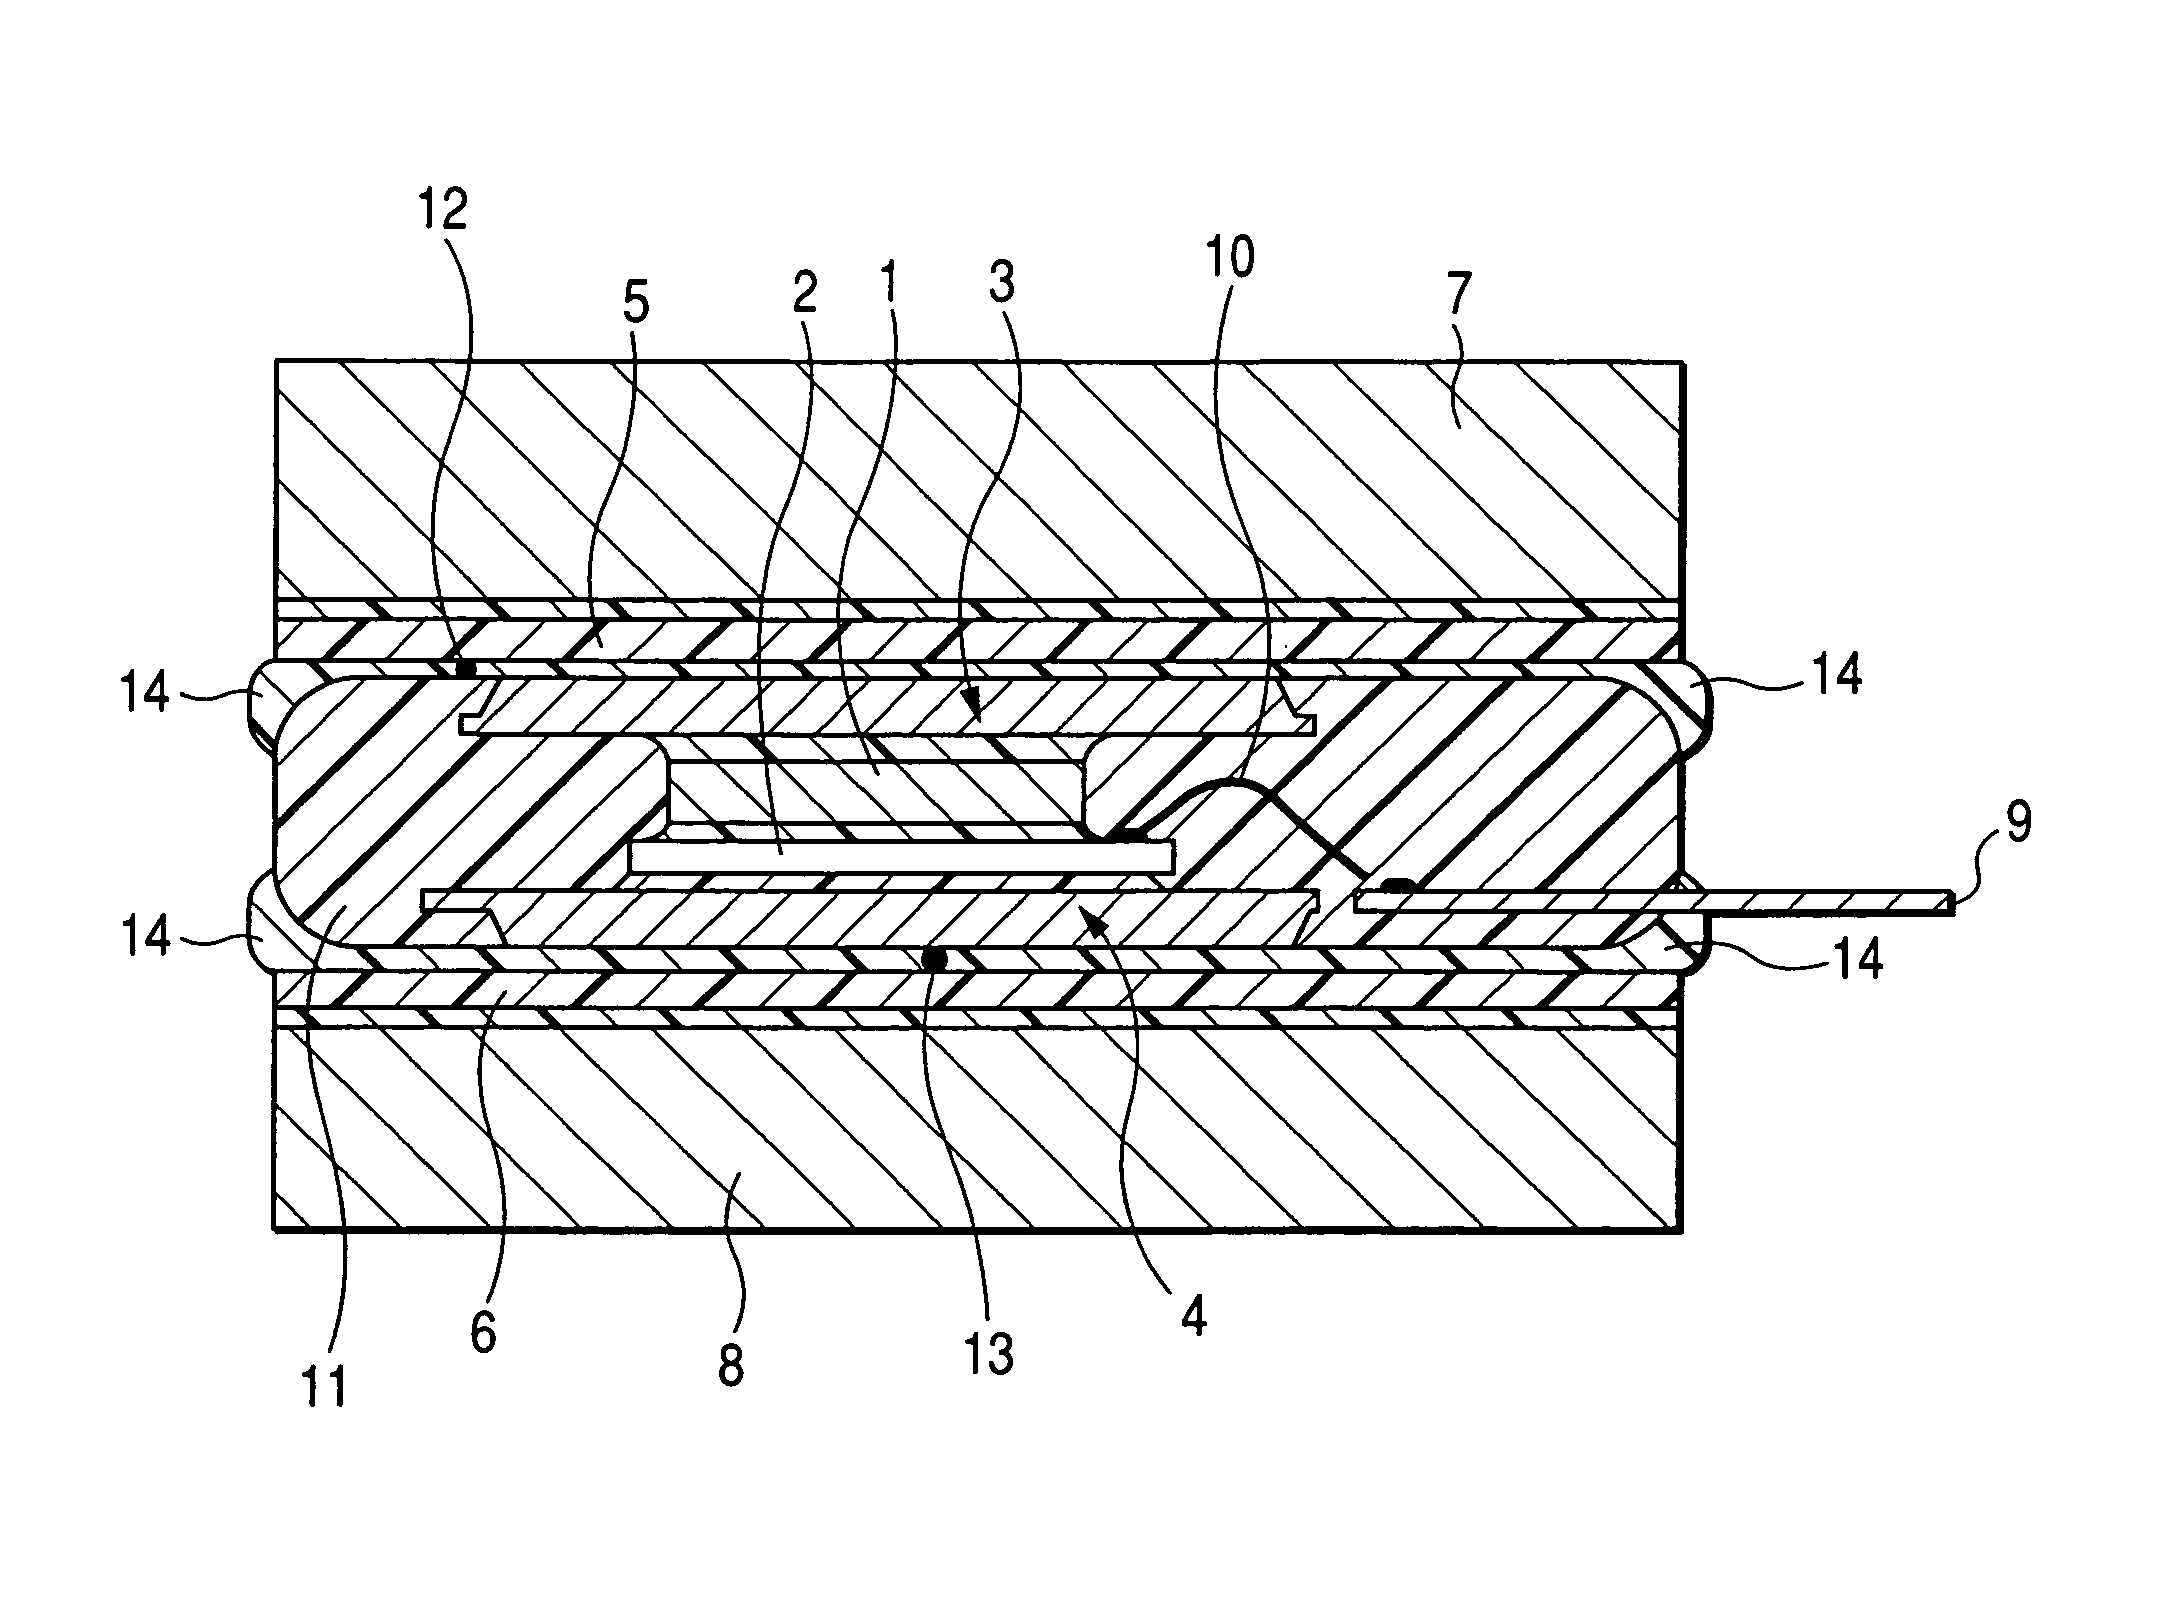 Semiconductor module mounting structure, a cardlike semiconductor module, and heat receiving members bonded to the cardlike semiconductor module